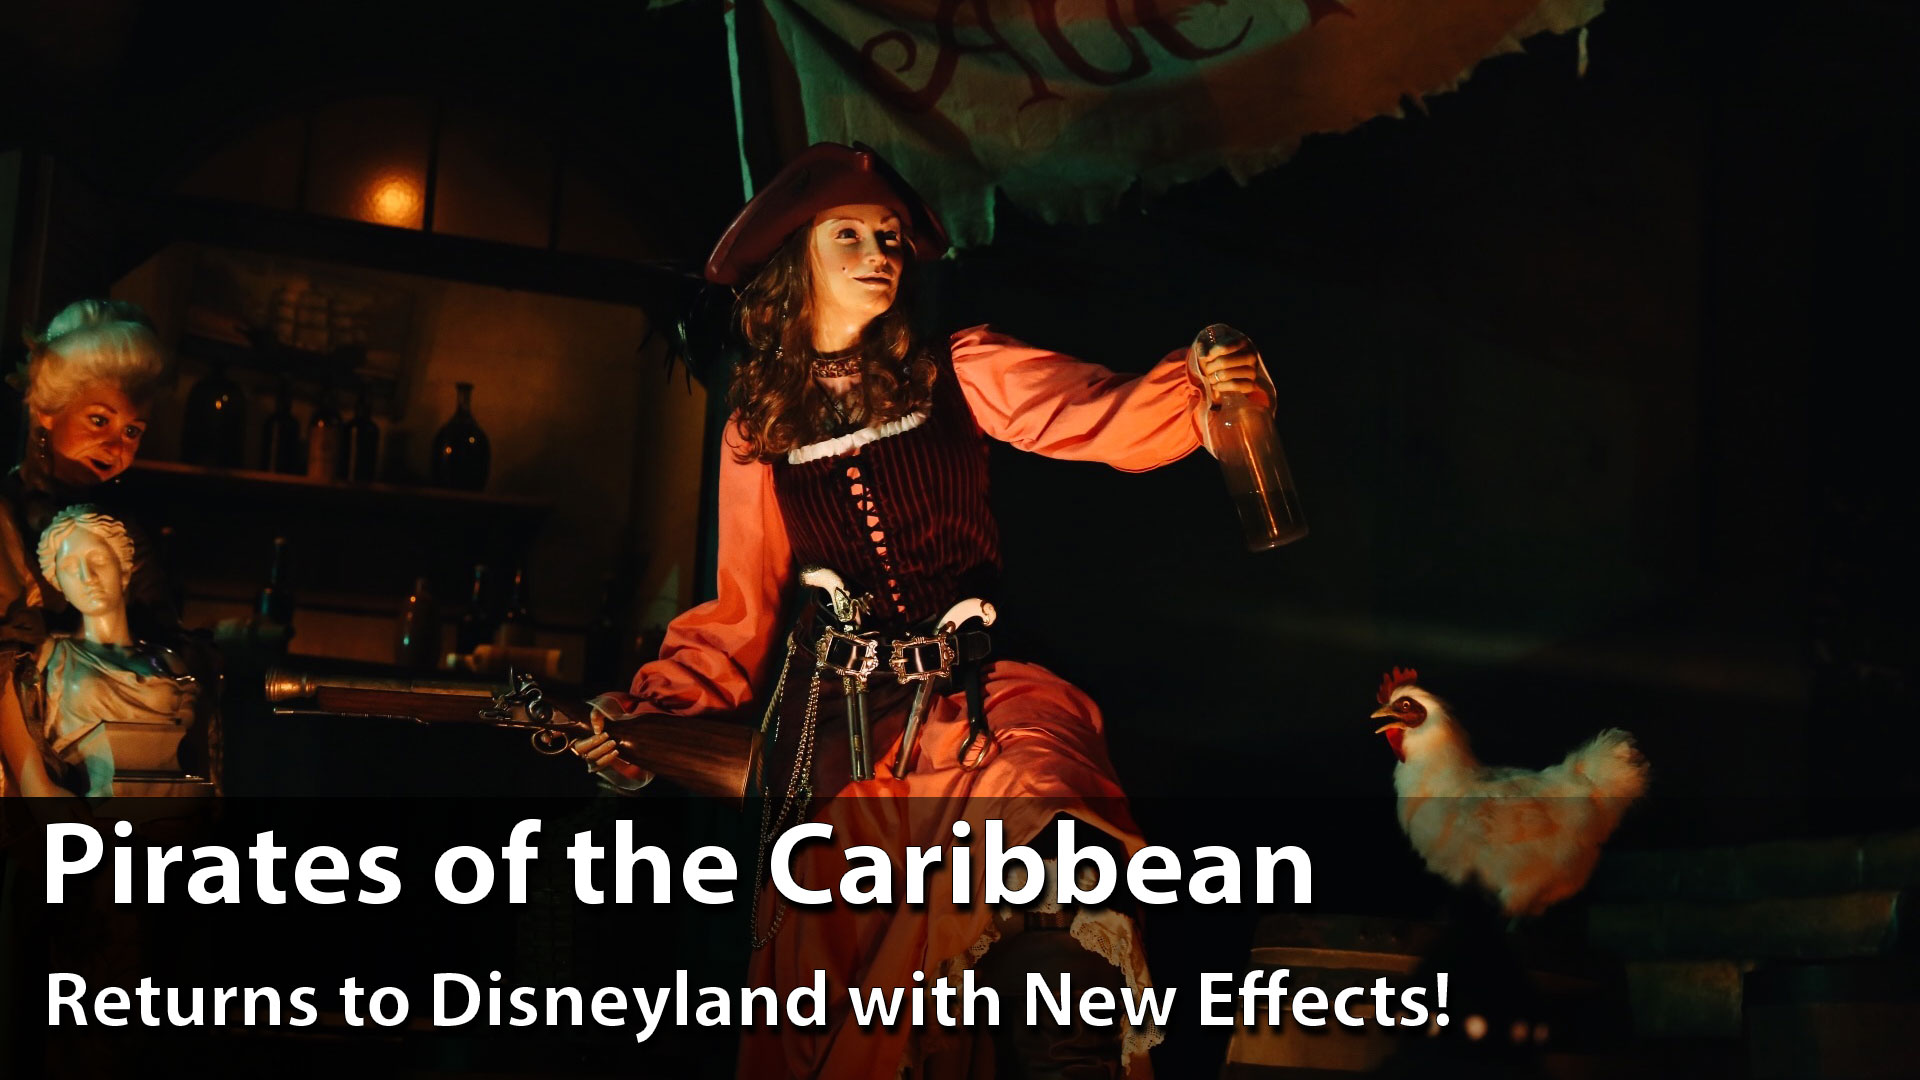 Pirates of the Caribbean Reopens with Expected and Unexpected New Surprises at Disneyland!